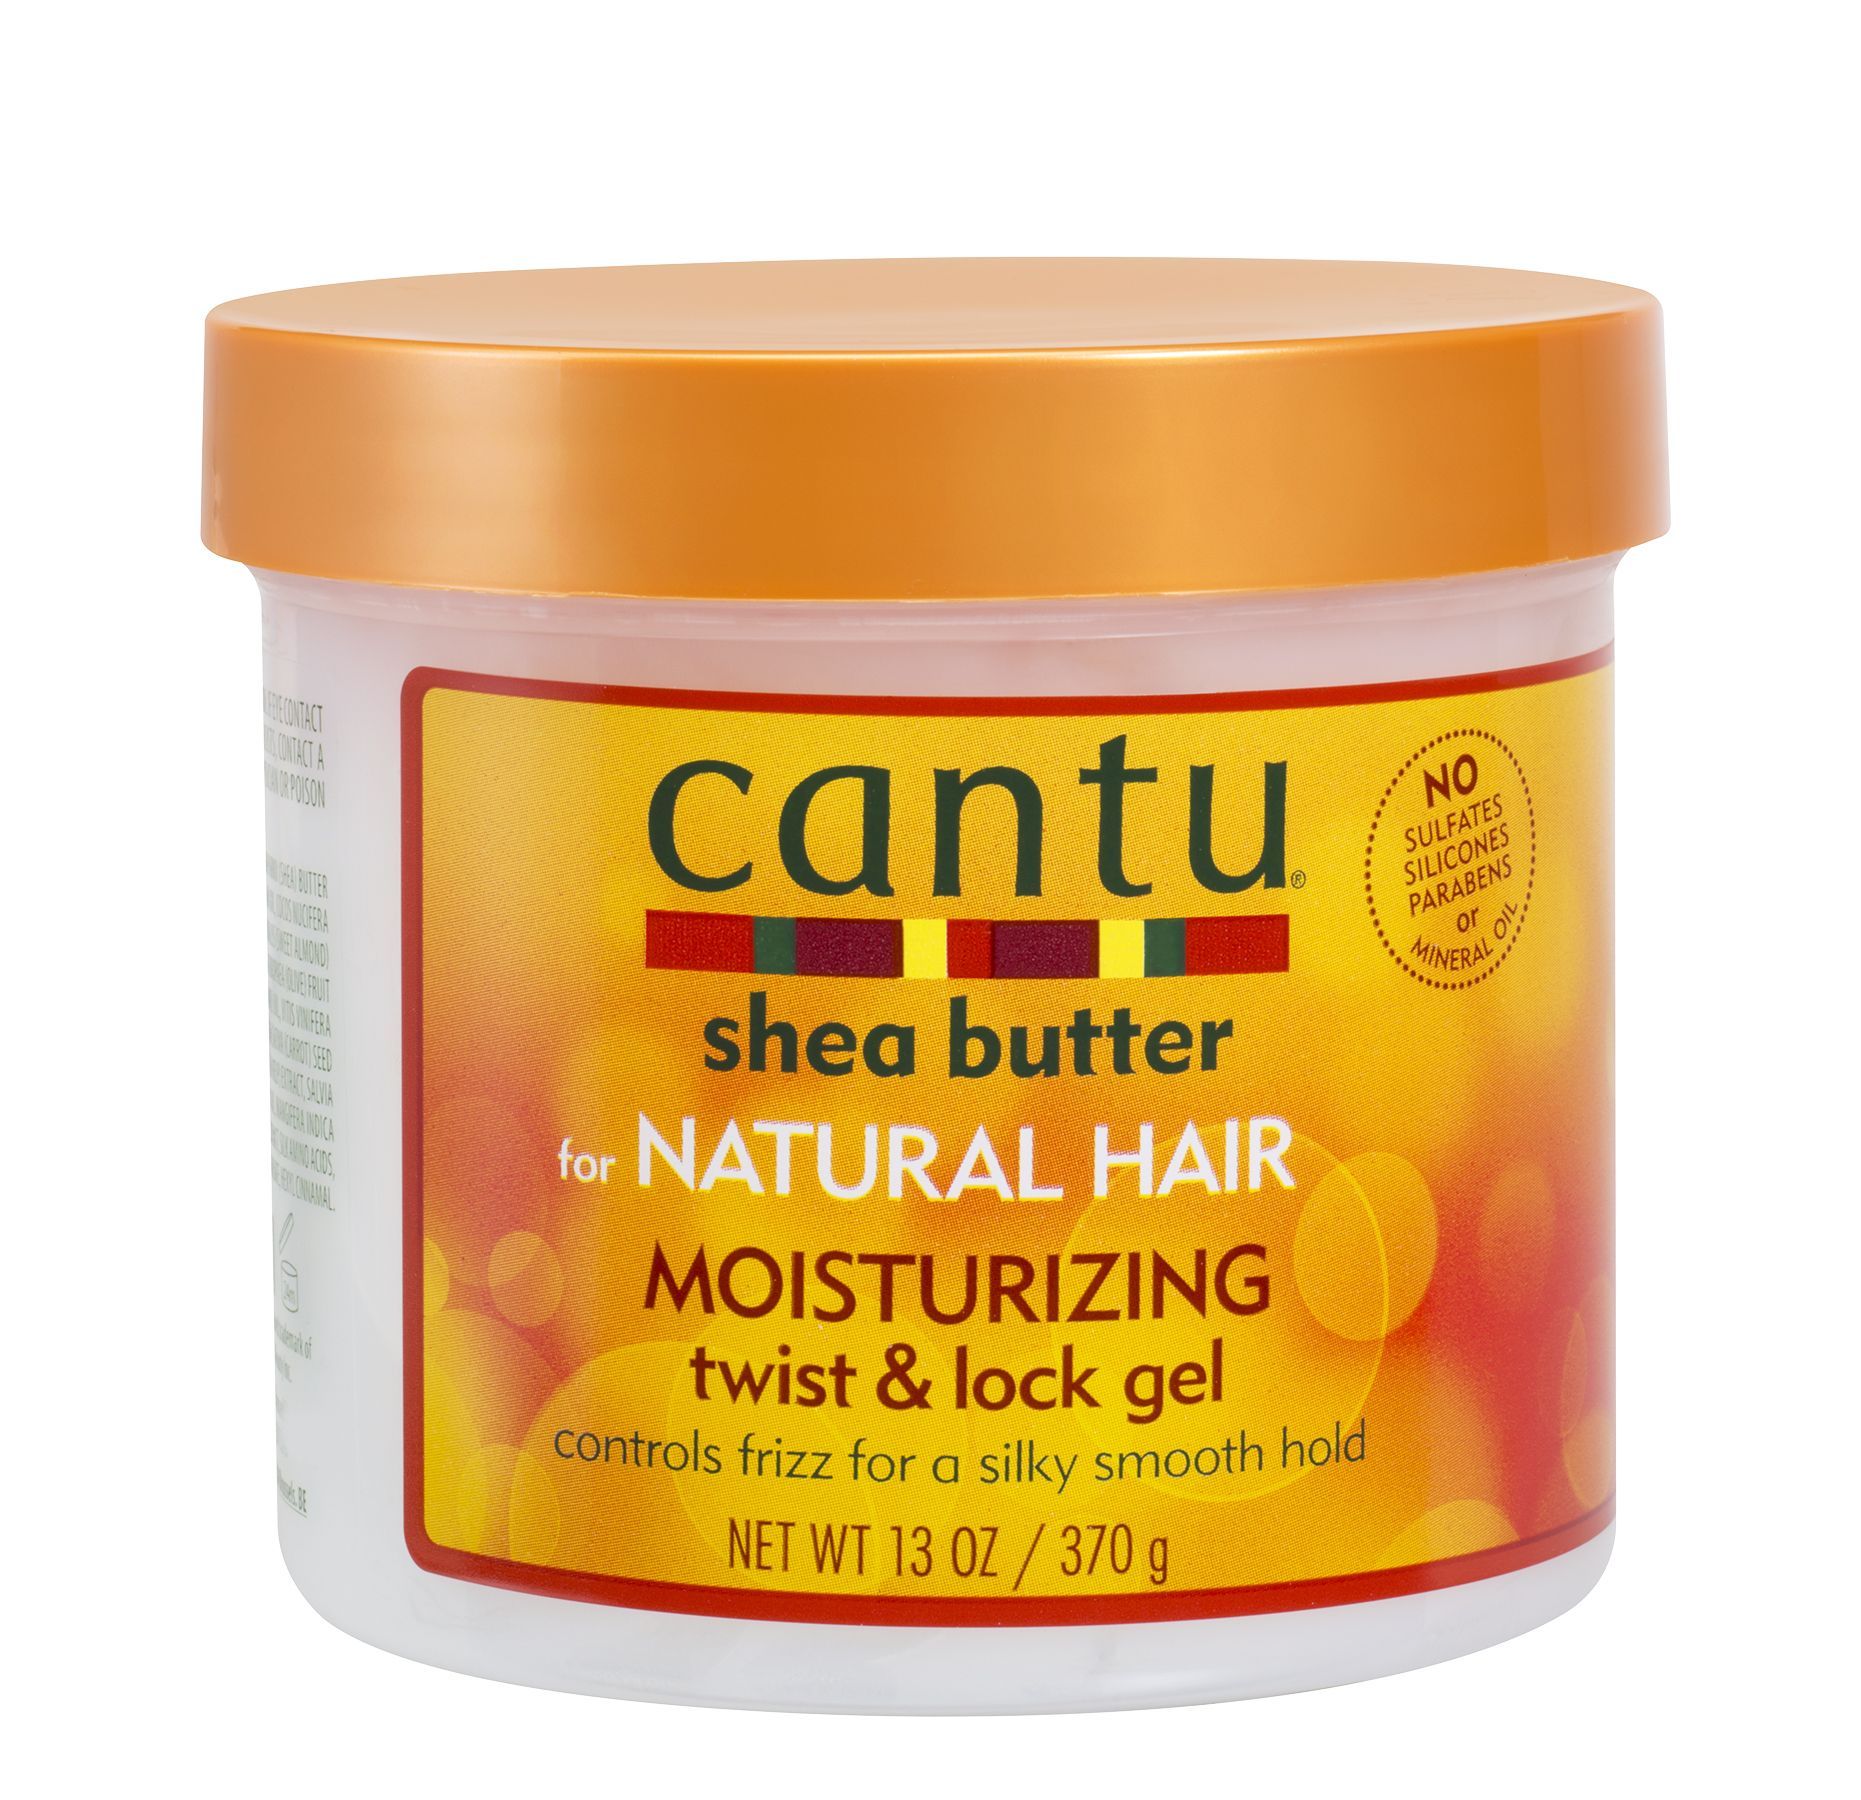 Best Hair Styling Gel for Women With Natural Hair and Curly Hair